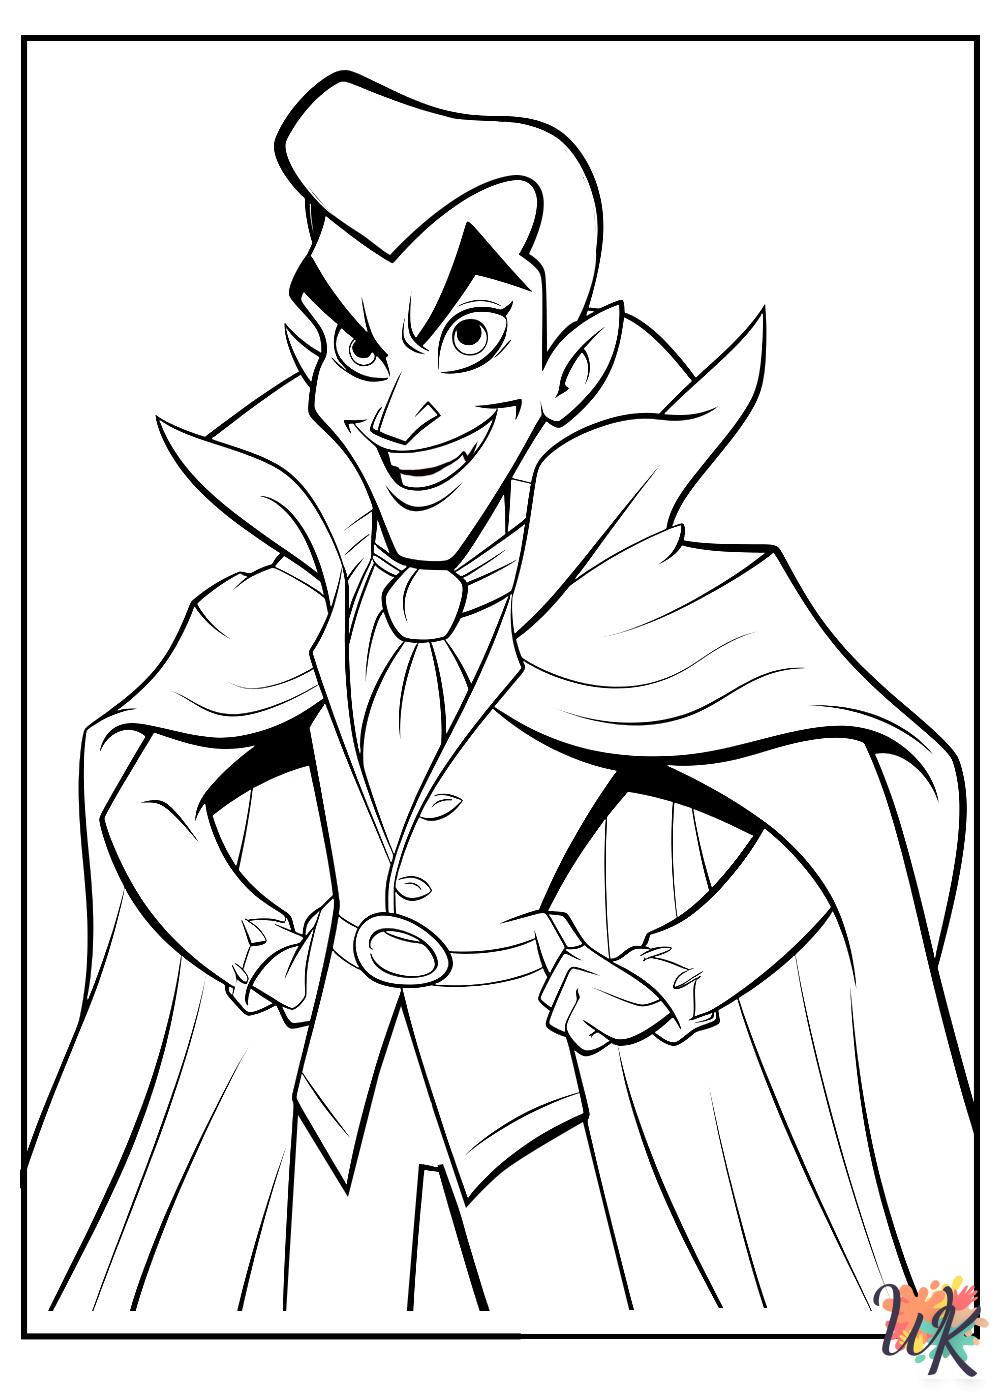 Dracula themed coloring pages